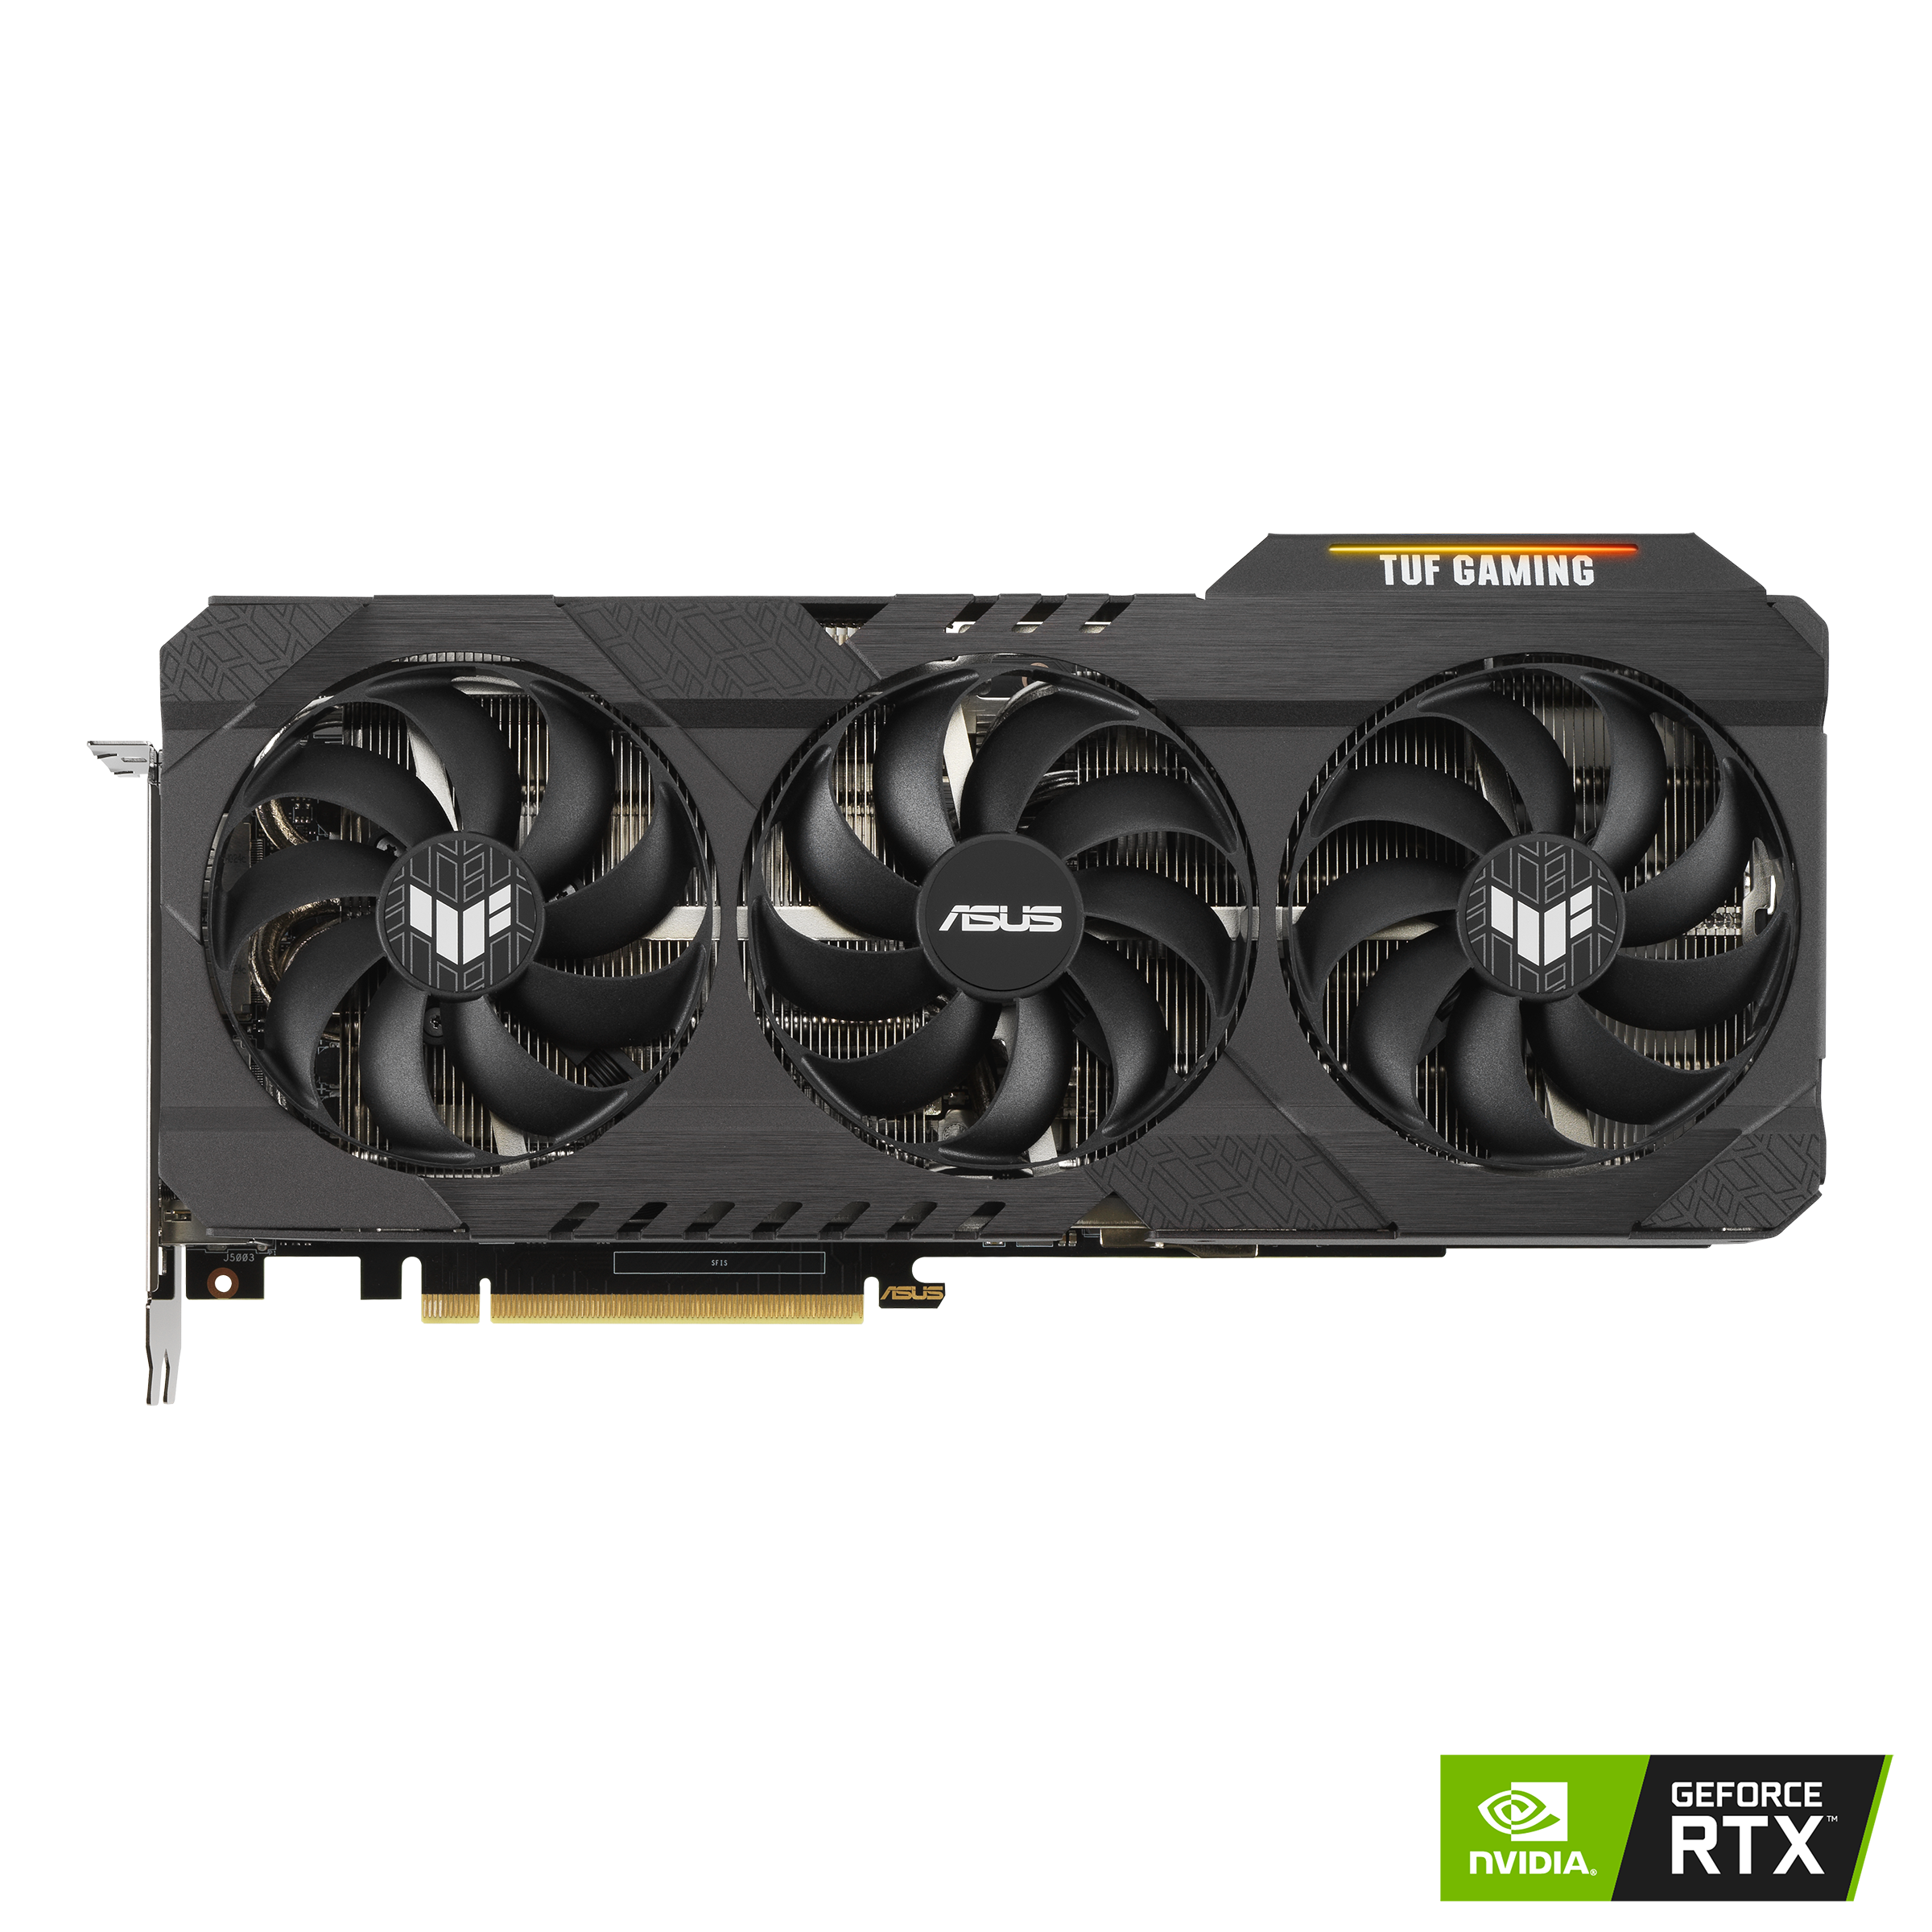 TUF-RTX3080-10G-GAMING｜Graphics Cards｜ASUS Global